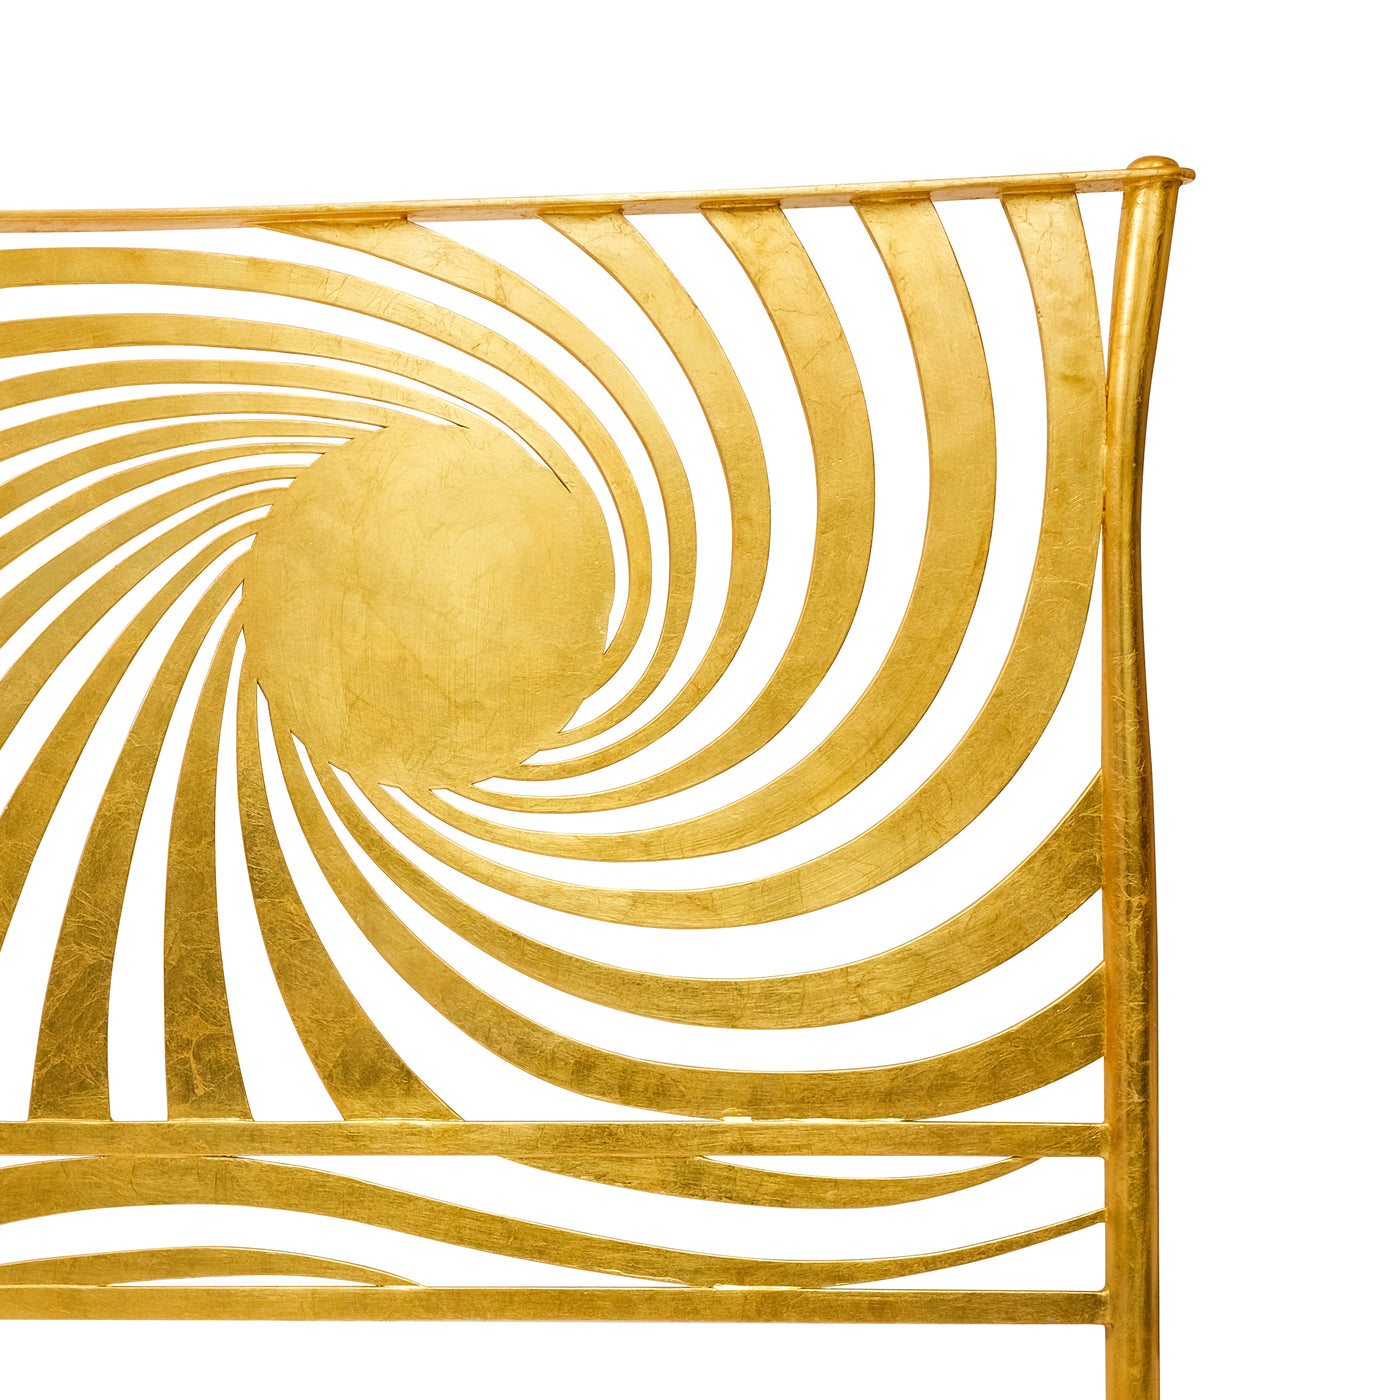 Close up of a modern double bed headboard inspired by the sun in a sparkling gold leaf finish